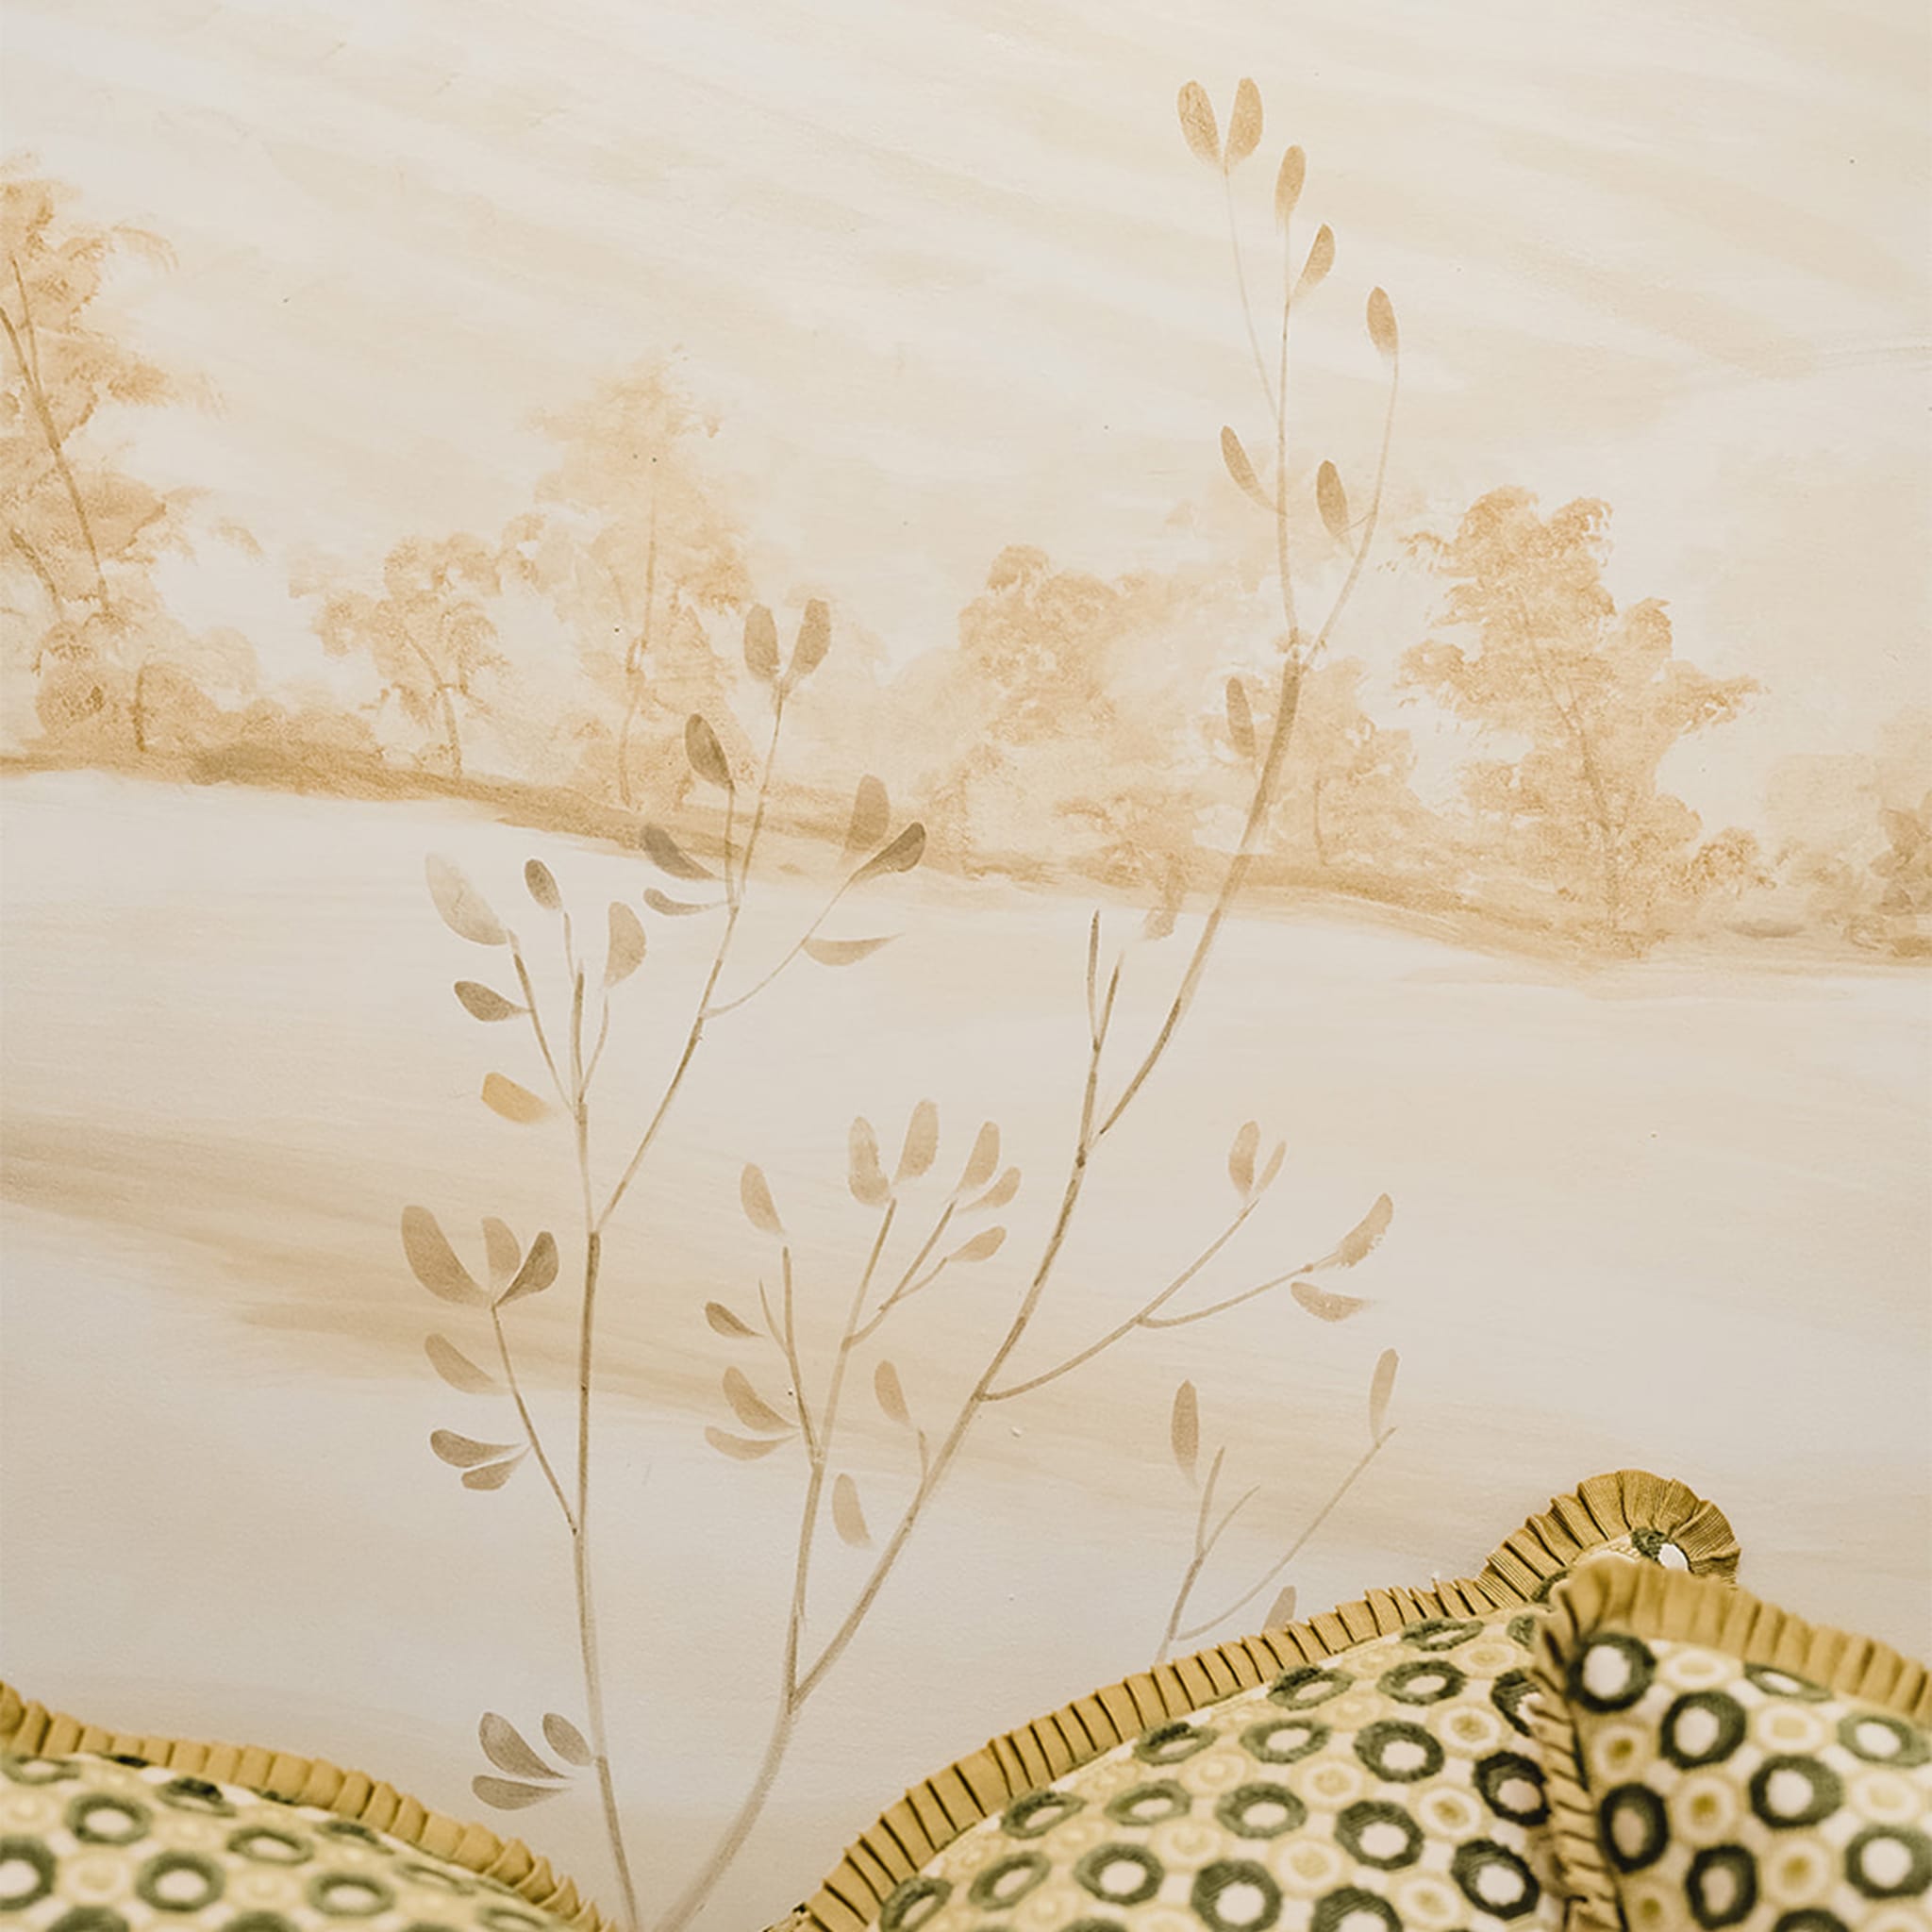 Monochromatic Countryside Hand-Painted Canvas Wallpaper  - Alternative view 2